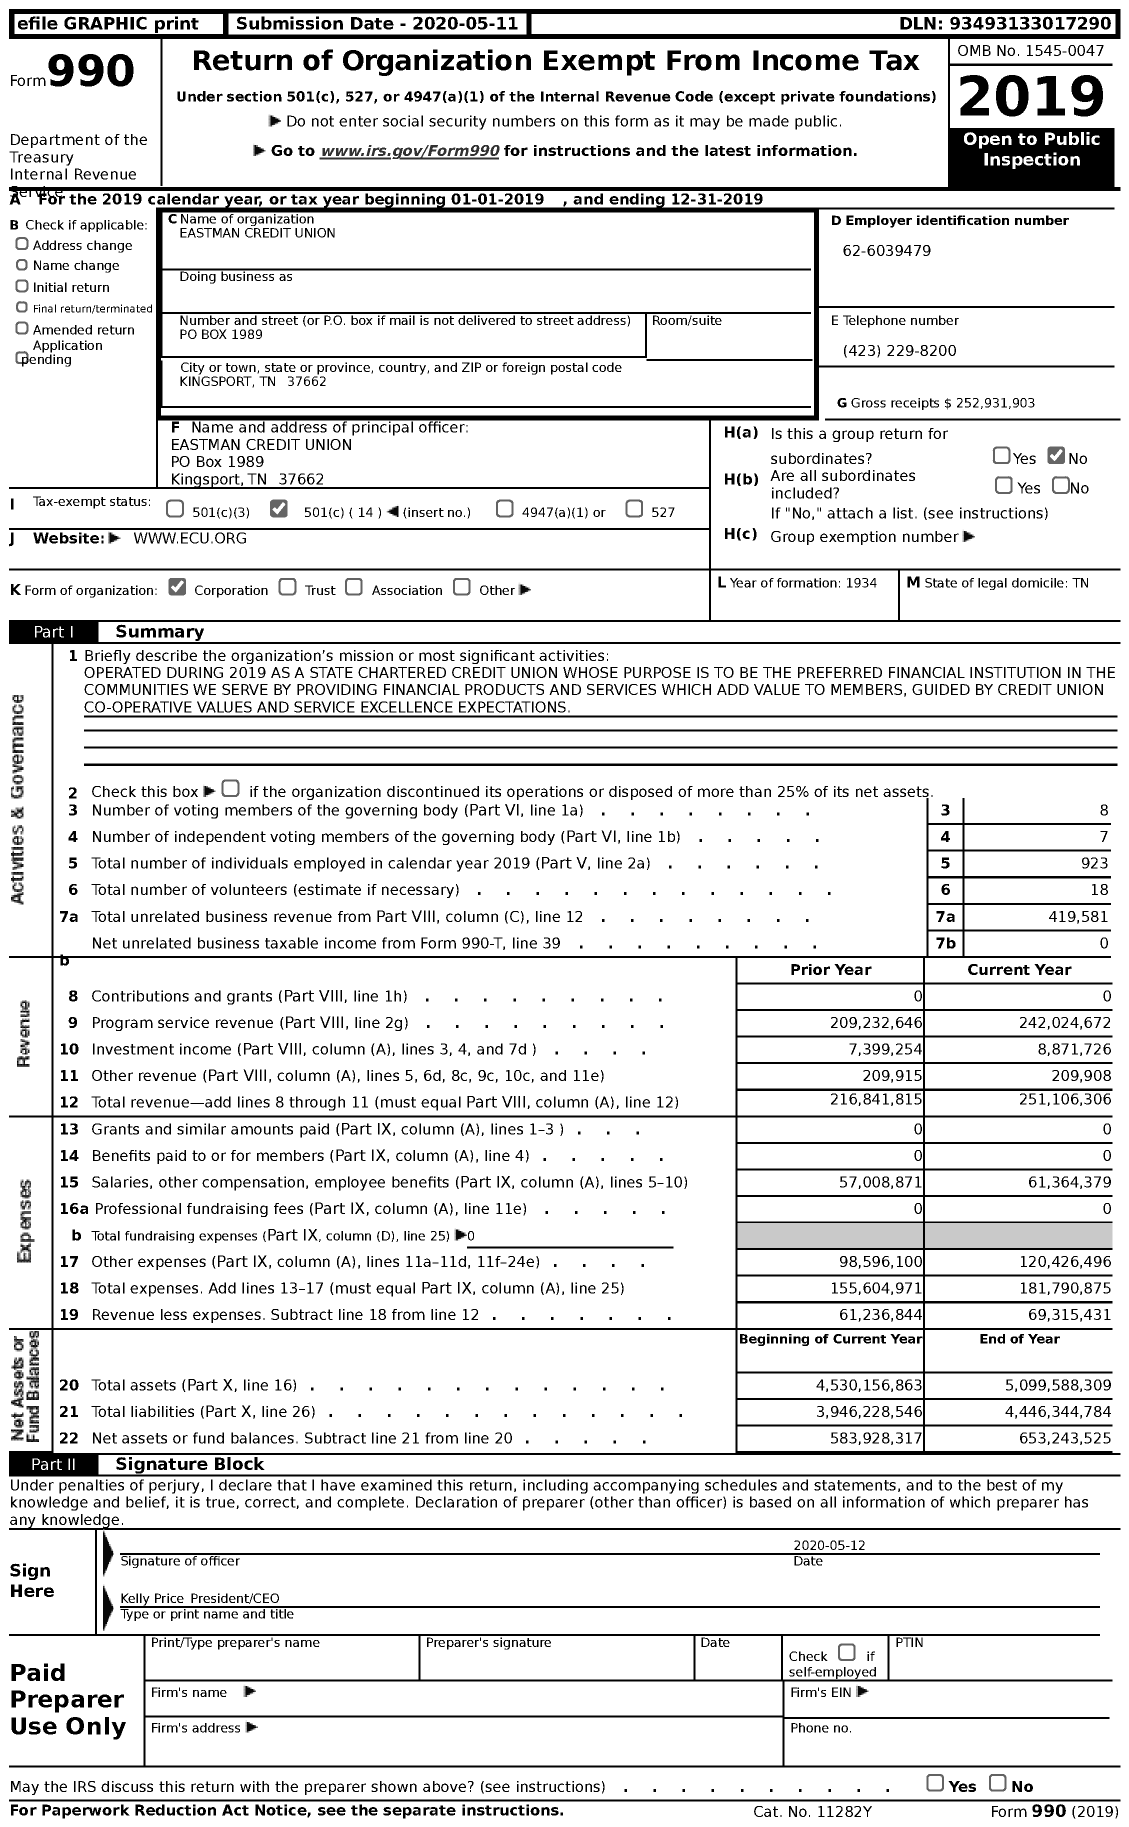 Image of first page of 2019 Form 990 for Eastman Credit Union (ECU)